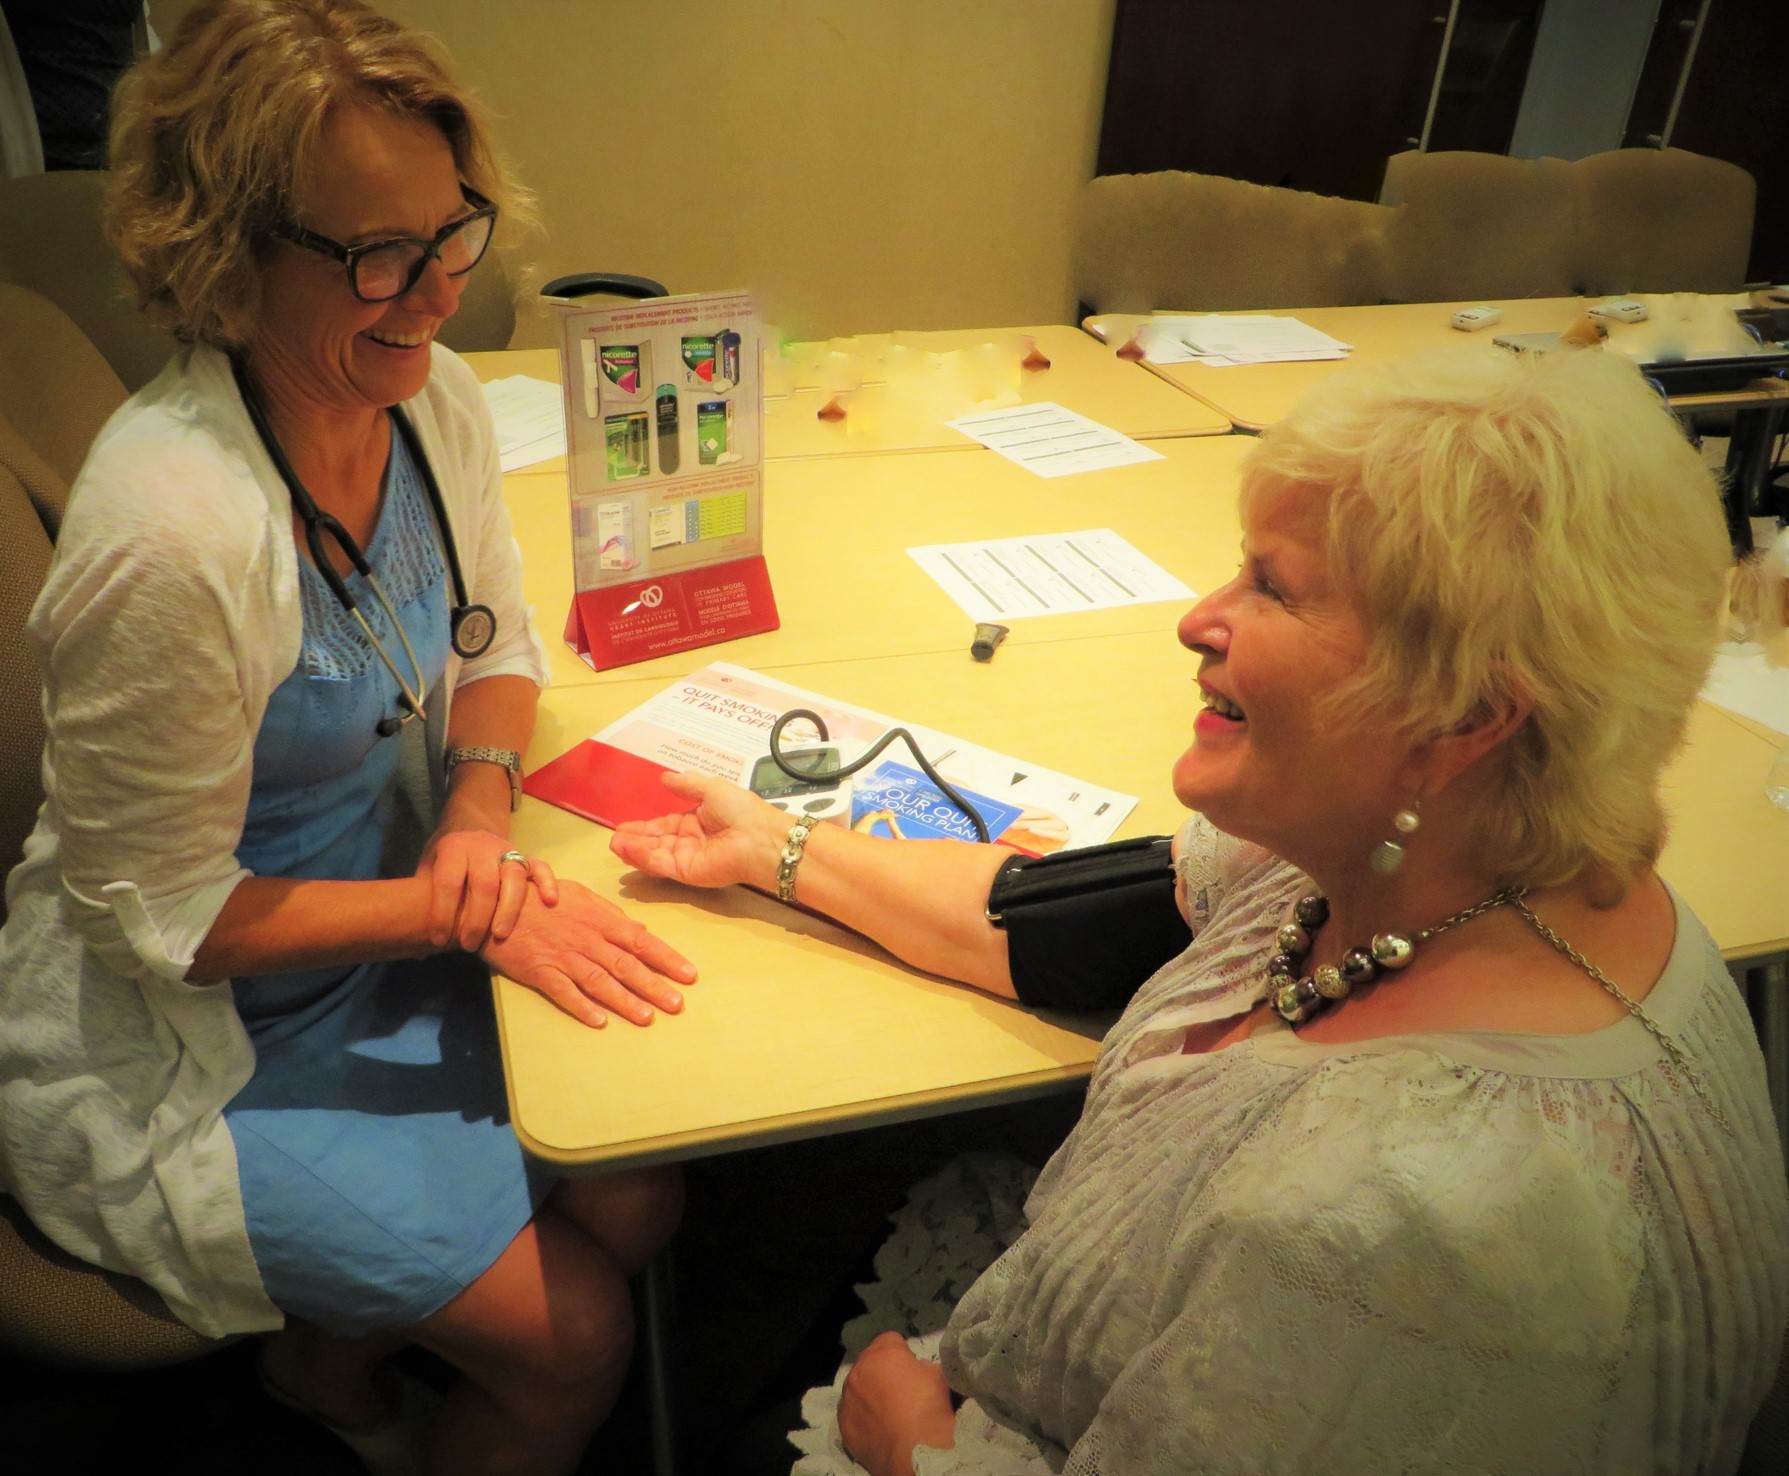 A healthcare provider sitting across an elderly woman getting her blood pressure taken, engaging in pleasant conversation.